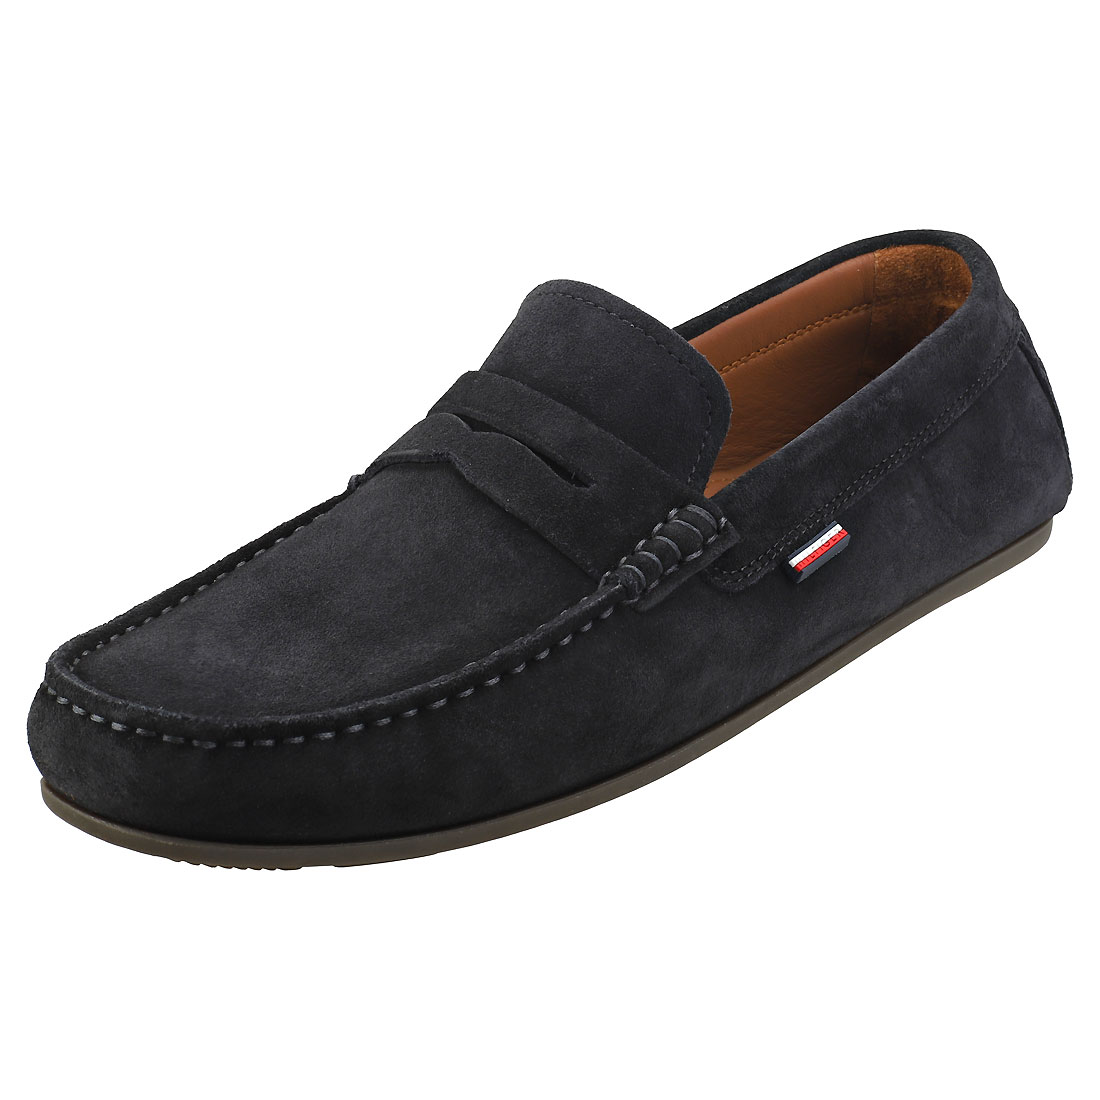 Midnight Tommy Hilfiger Classic Suede Penny Loafer Mens Footwear Shoe ...